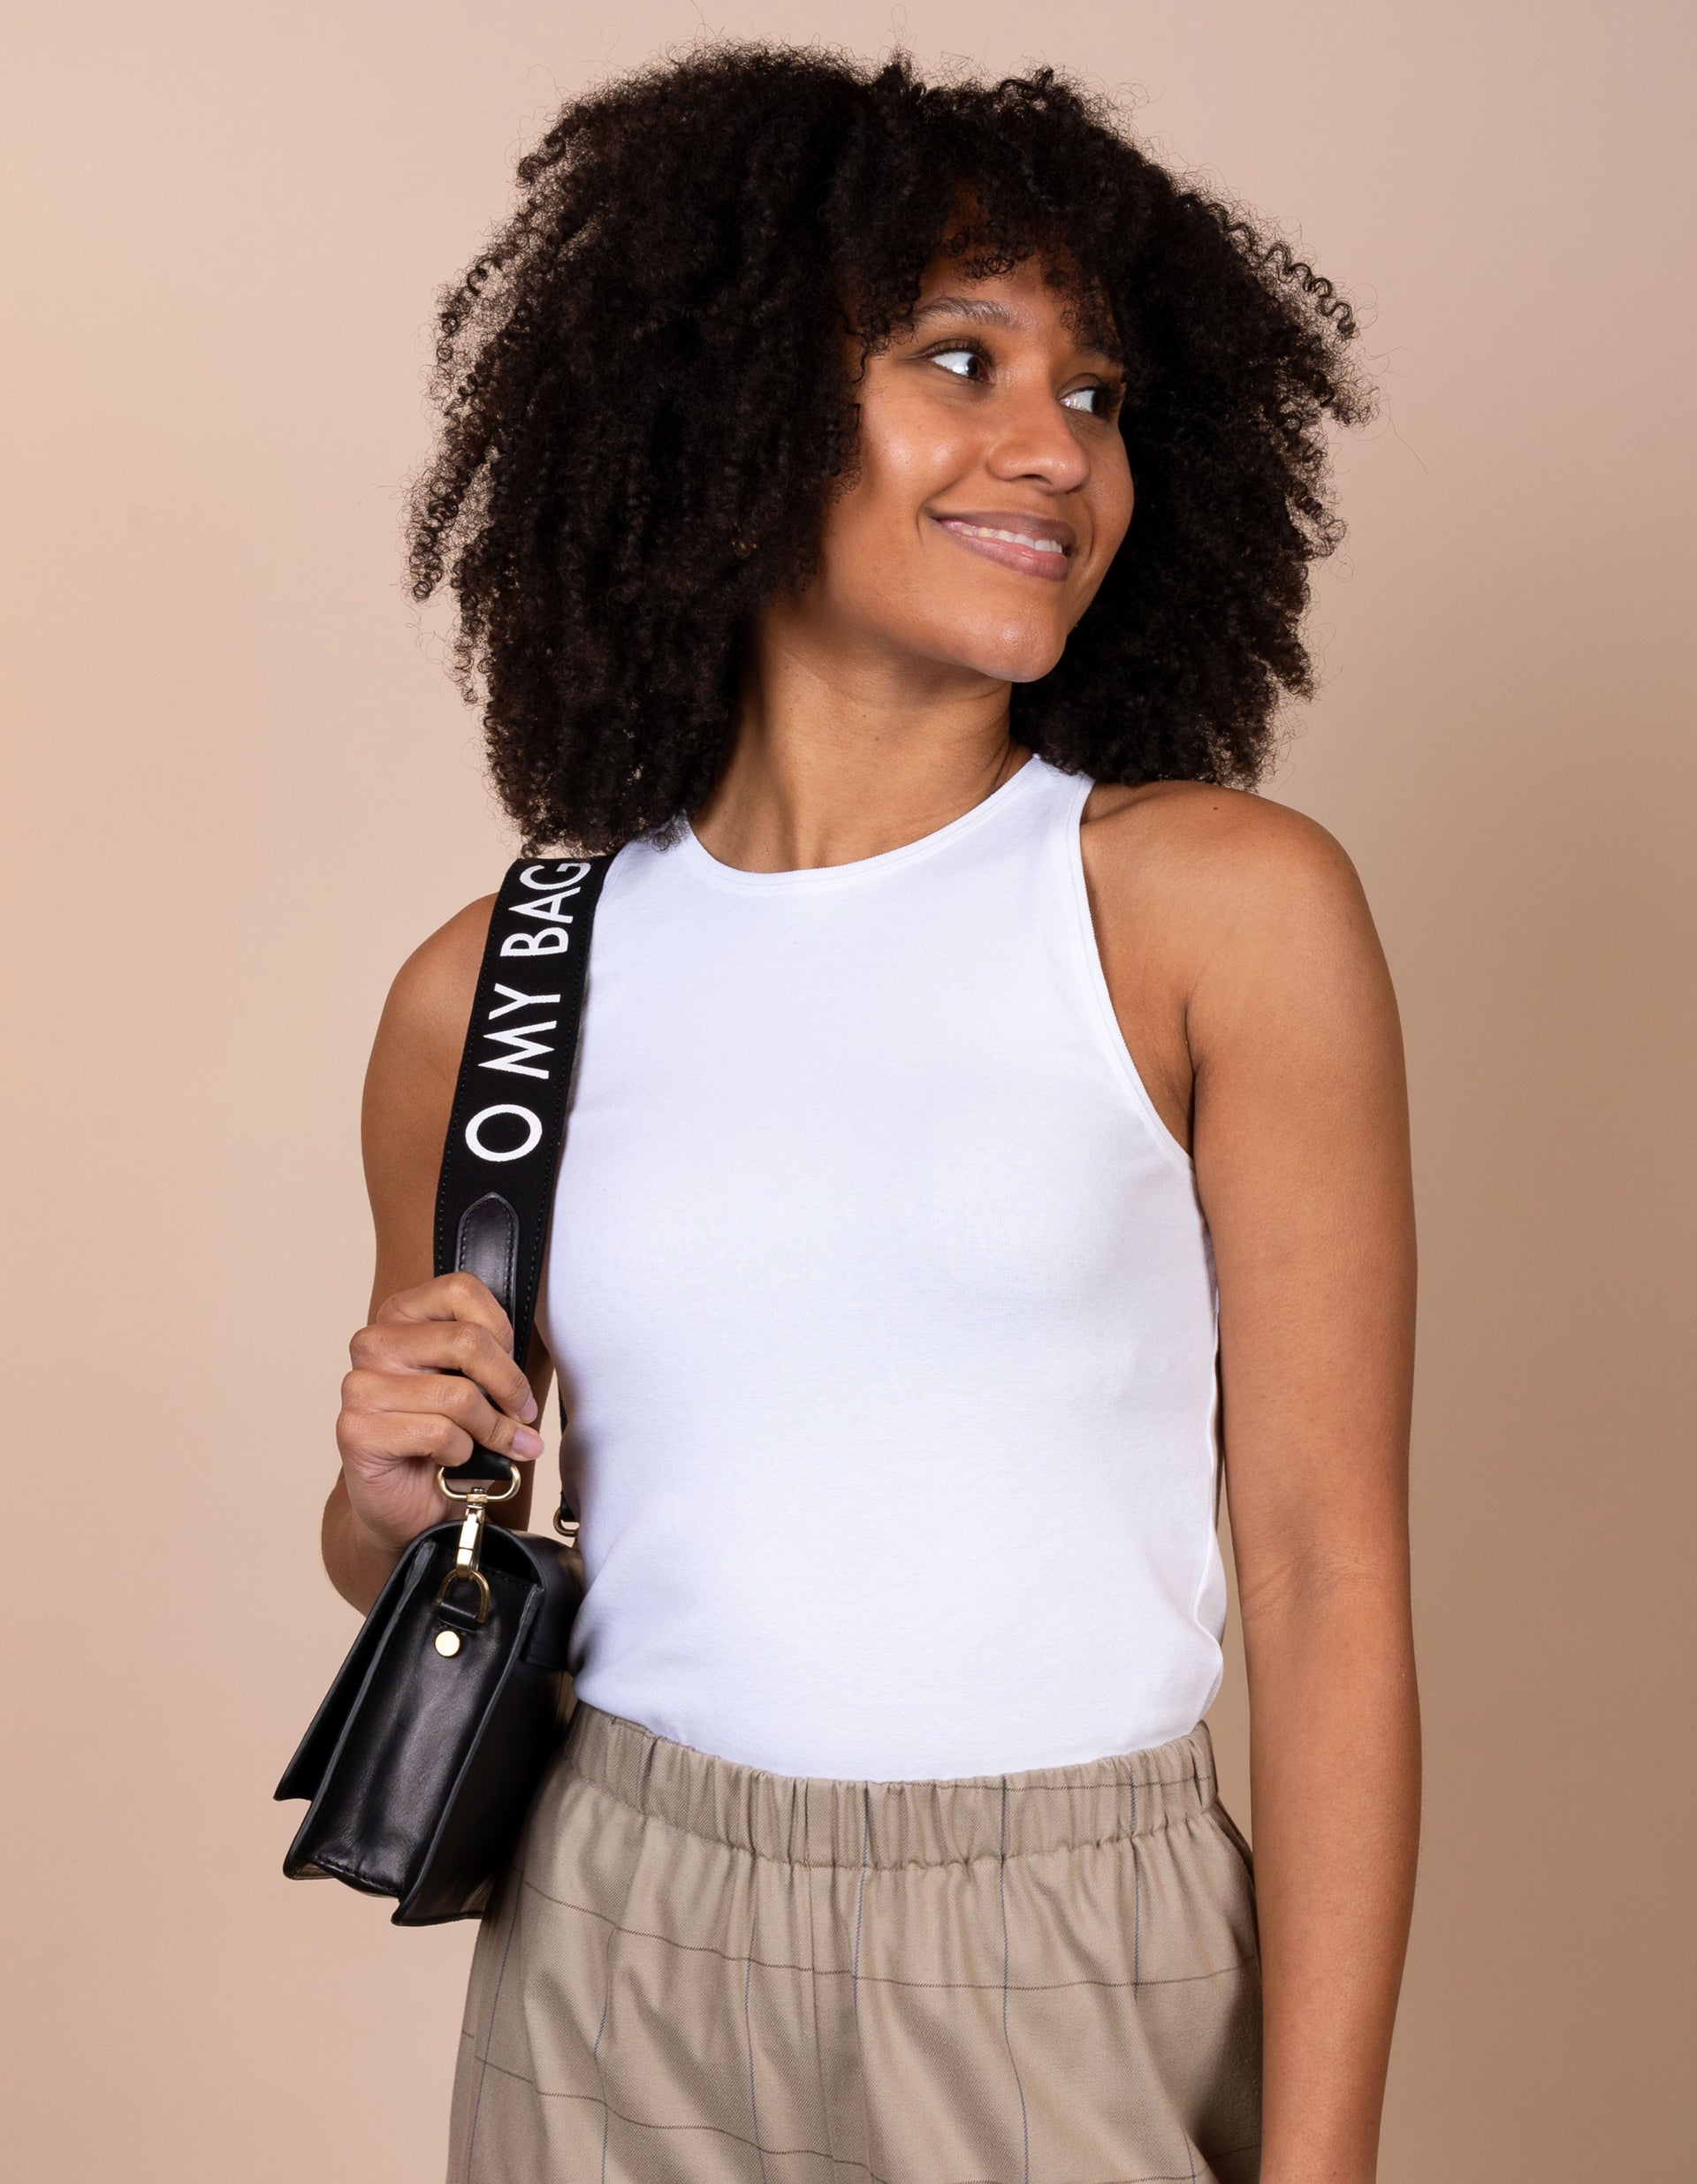 Canvas O My Bag Logo Strap in black. Model image, styled with Audrey Mini - second product image